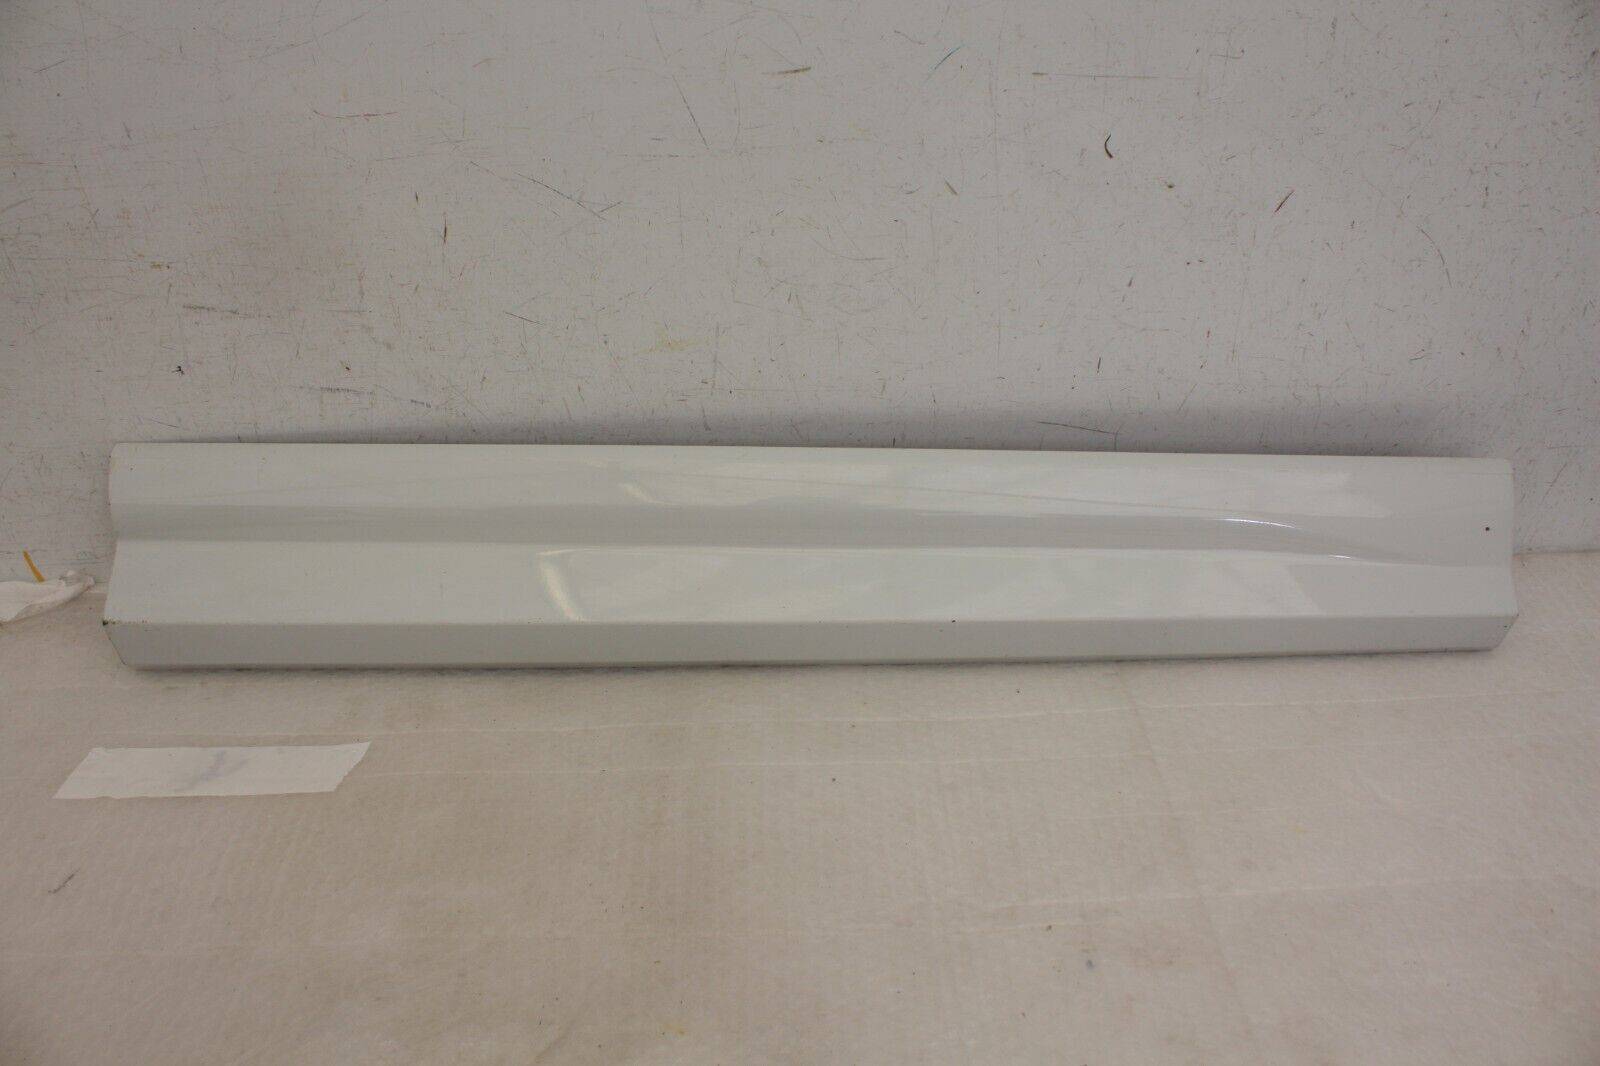 Audi Q2 S Line Front Right Door Moulding 2016 TO 2021 81A853960A Genuine 176328440488